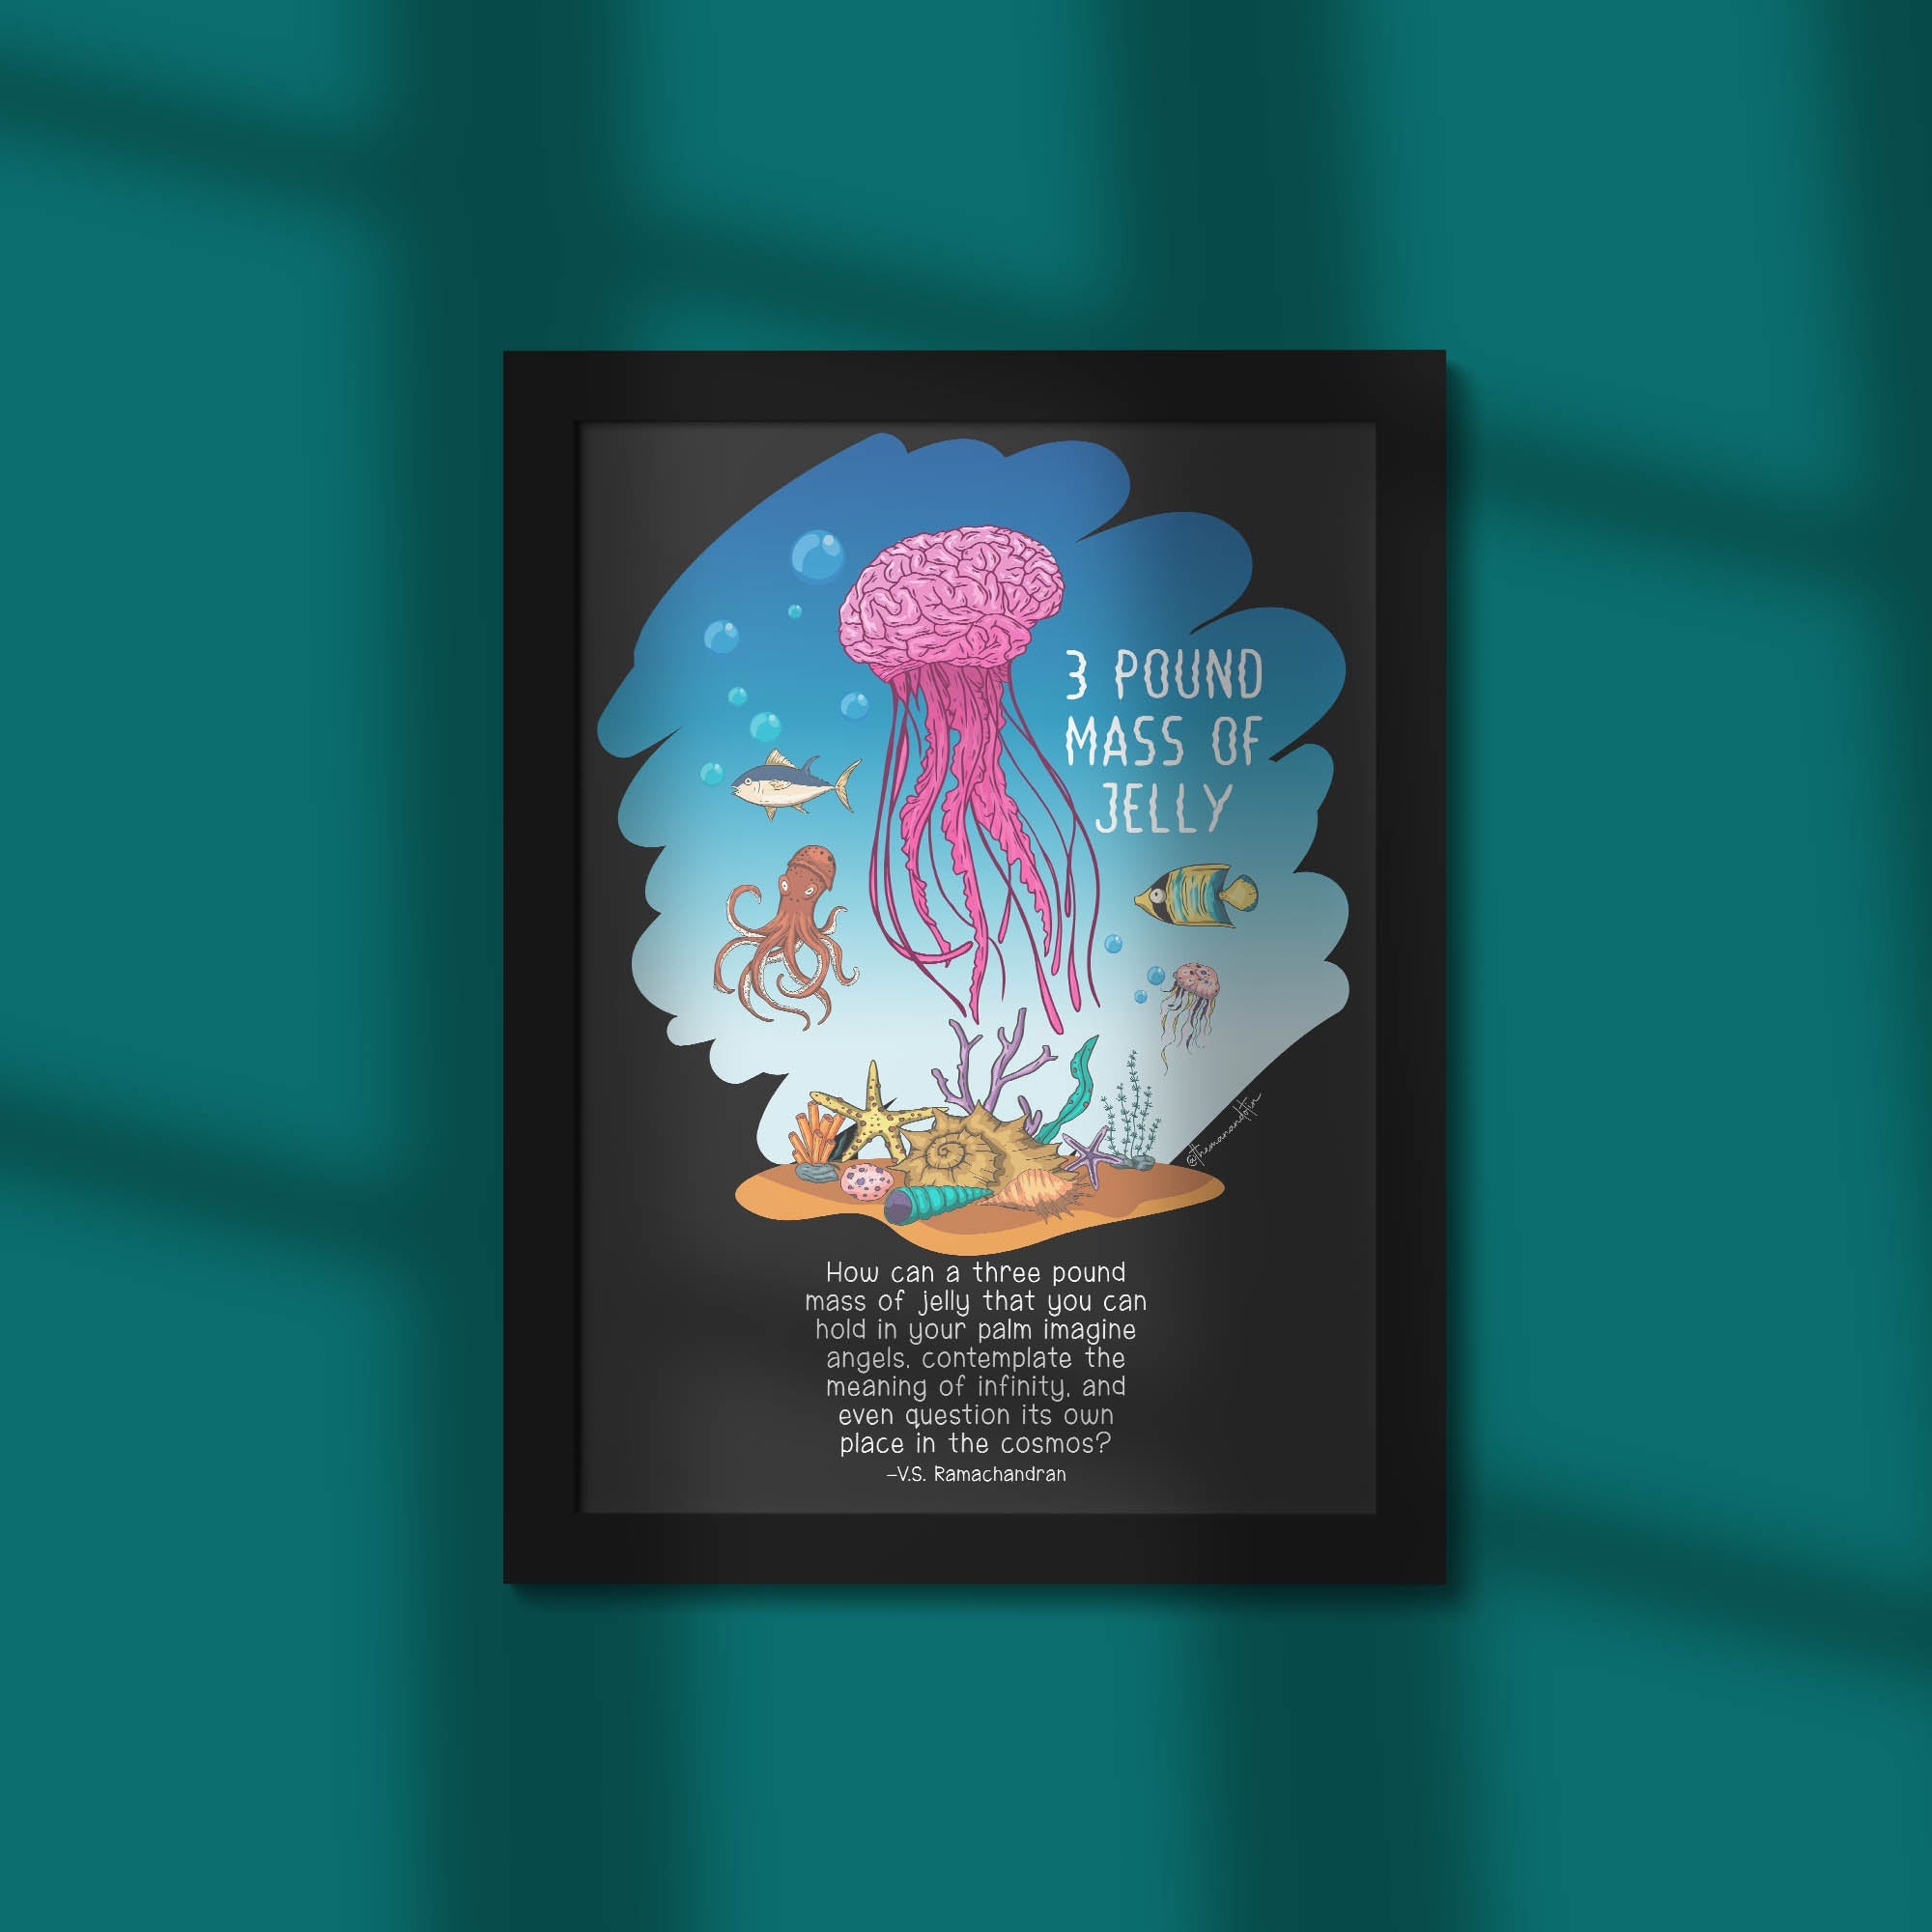 Three Pound Mass Of Jelly - Framed Poster For Clinics, Hospitals &amp; Study Spaces